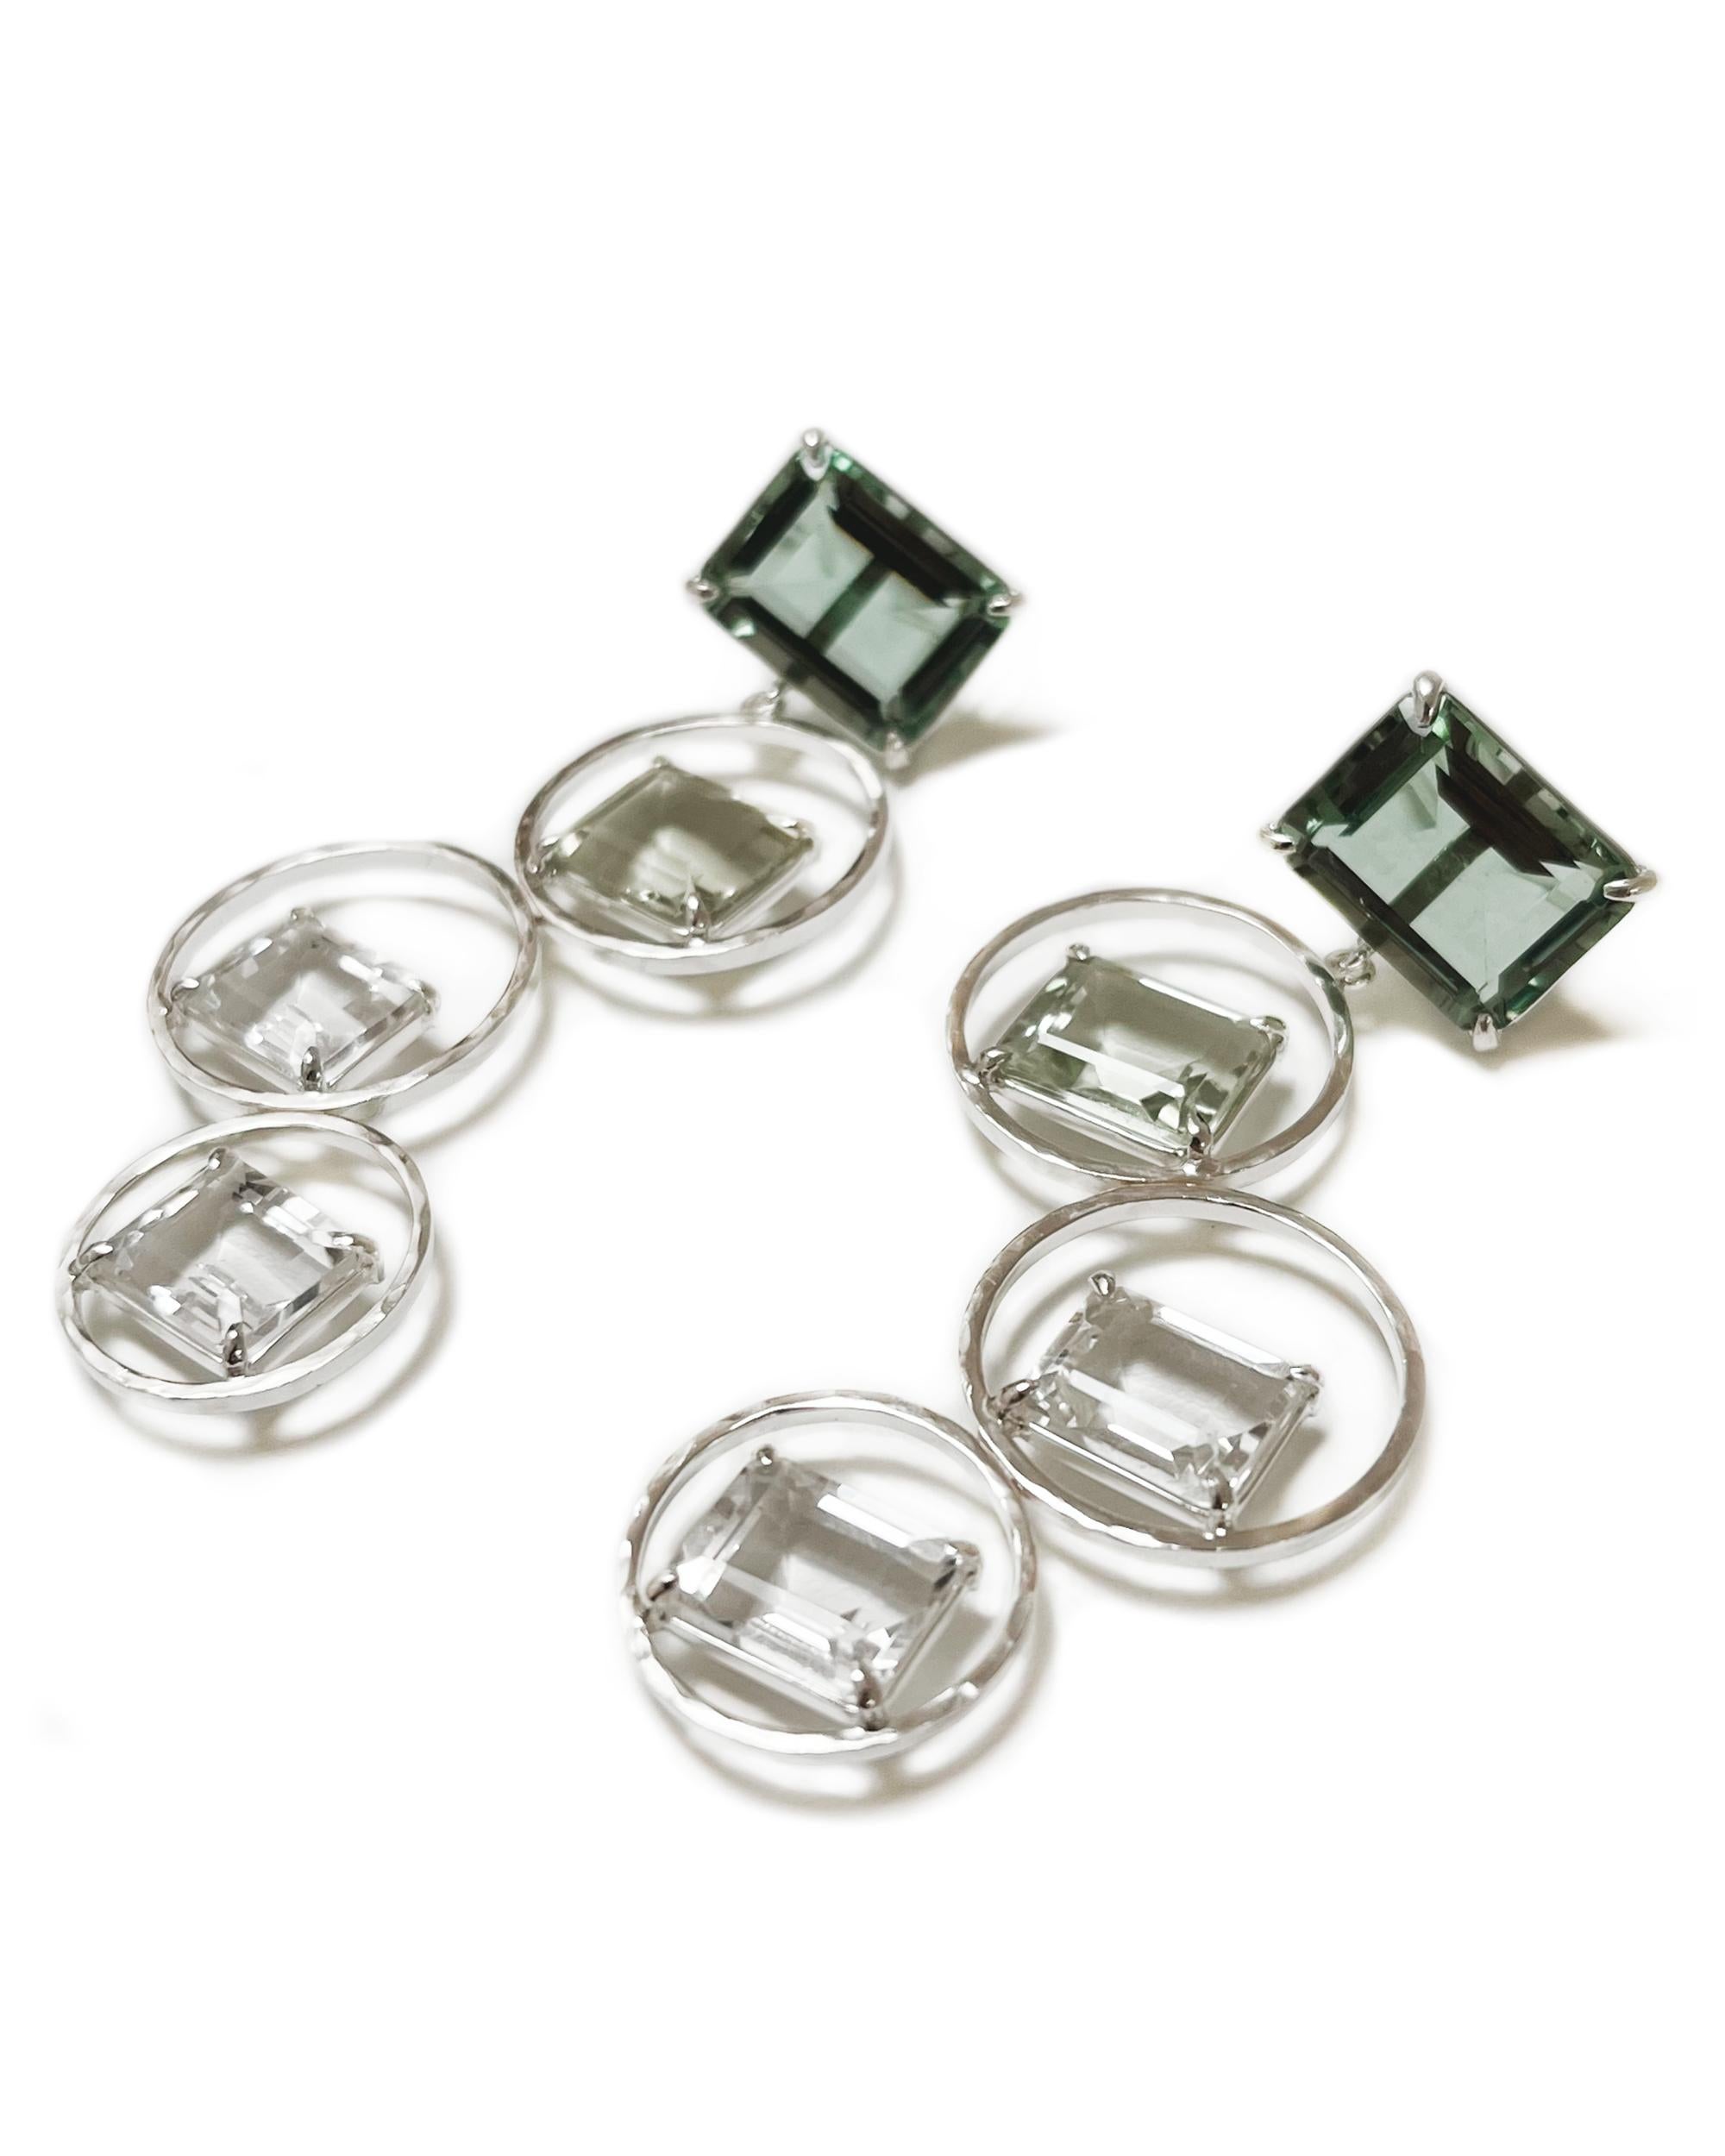 Contemporary Sarah Earrings in Green Quartz, Prasiolite, White Topaz and Sterling Silver For Sale